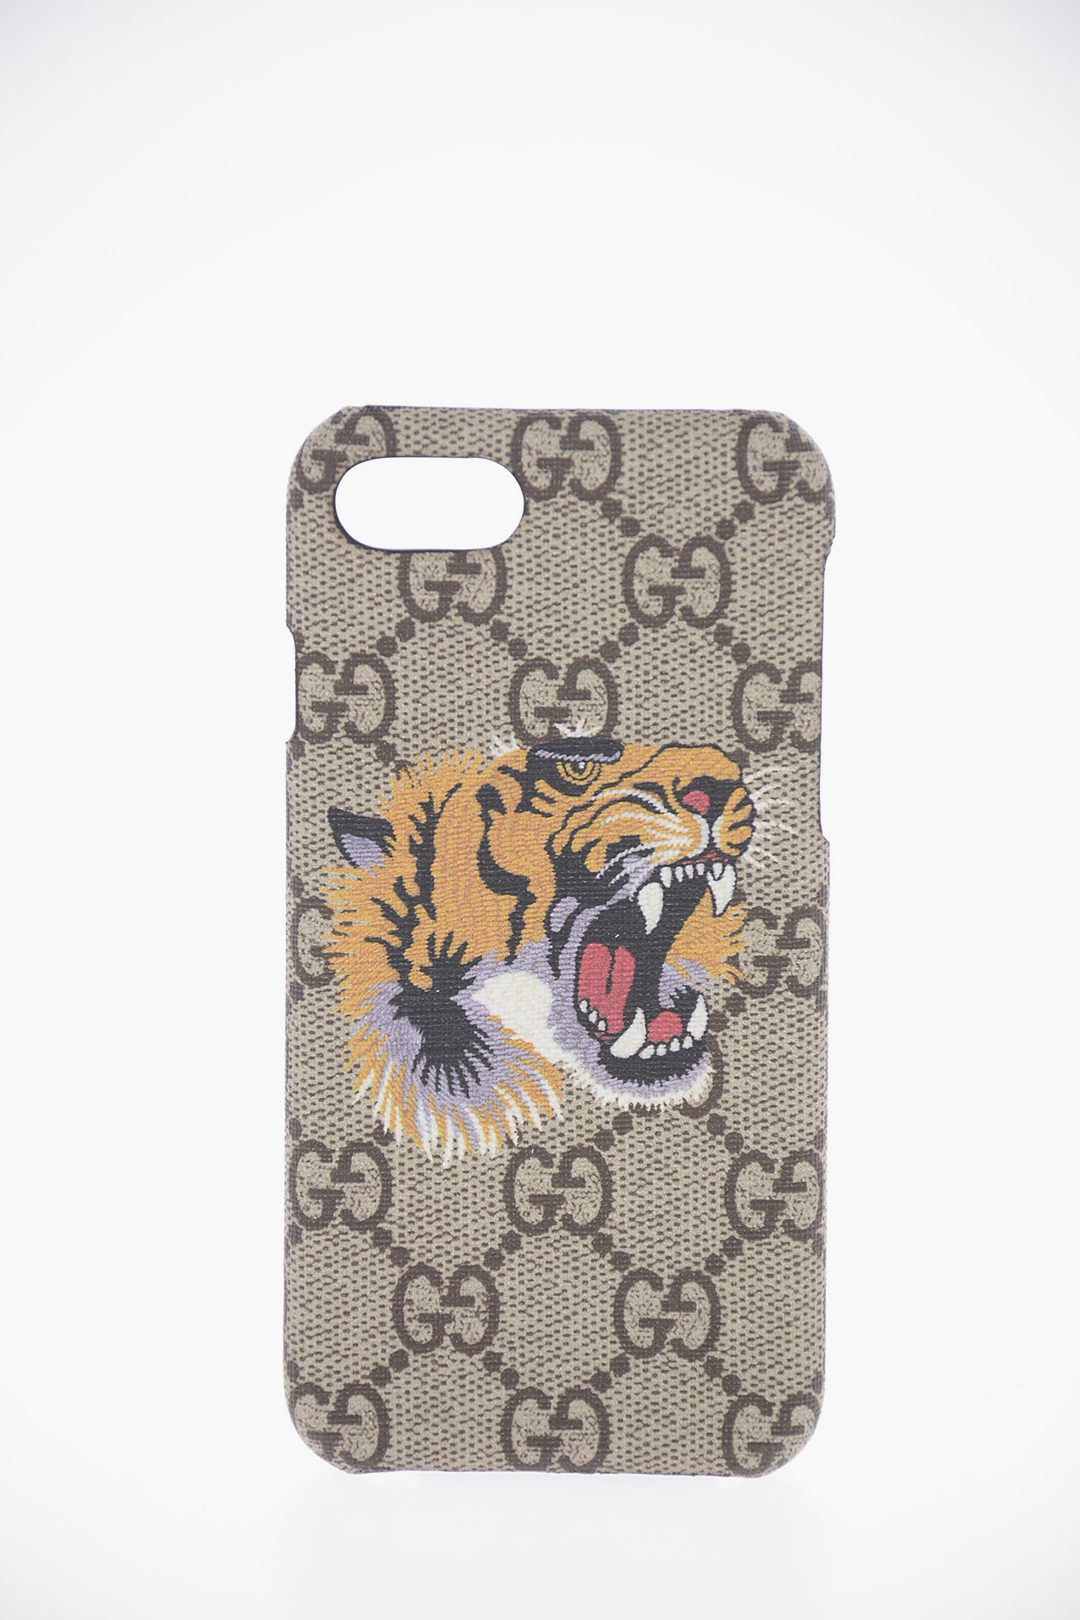 Gucci Tiger Printed iPhone 8 Cover 